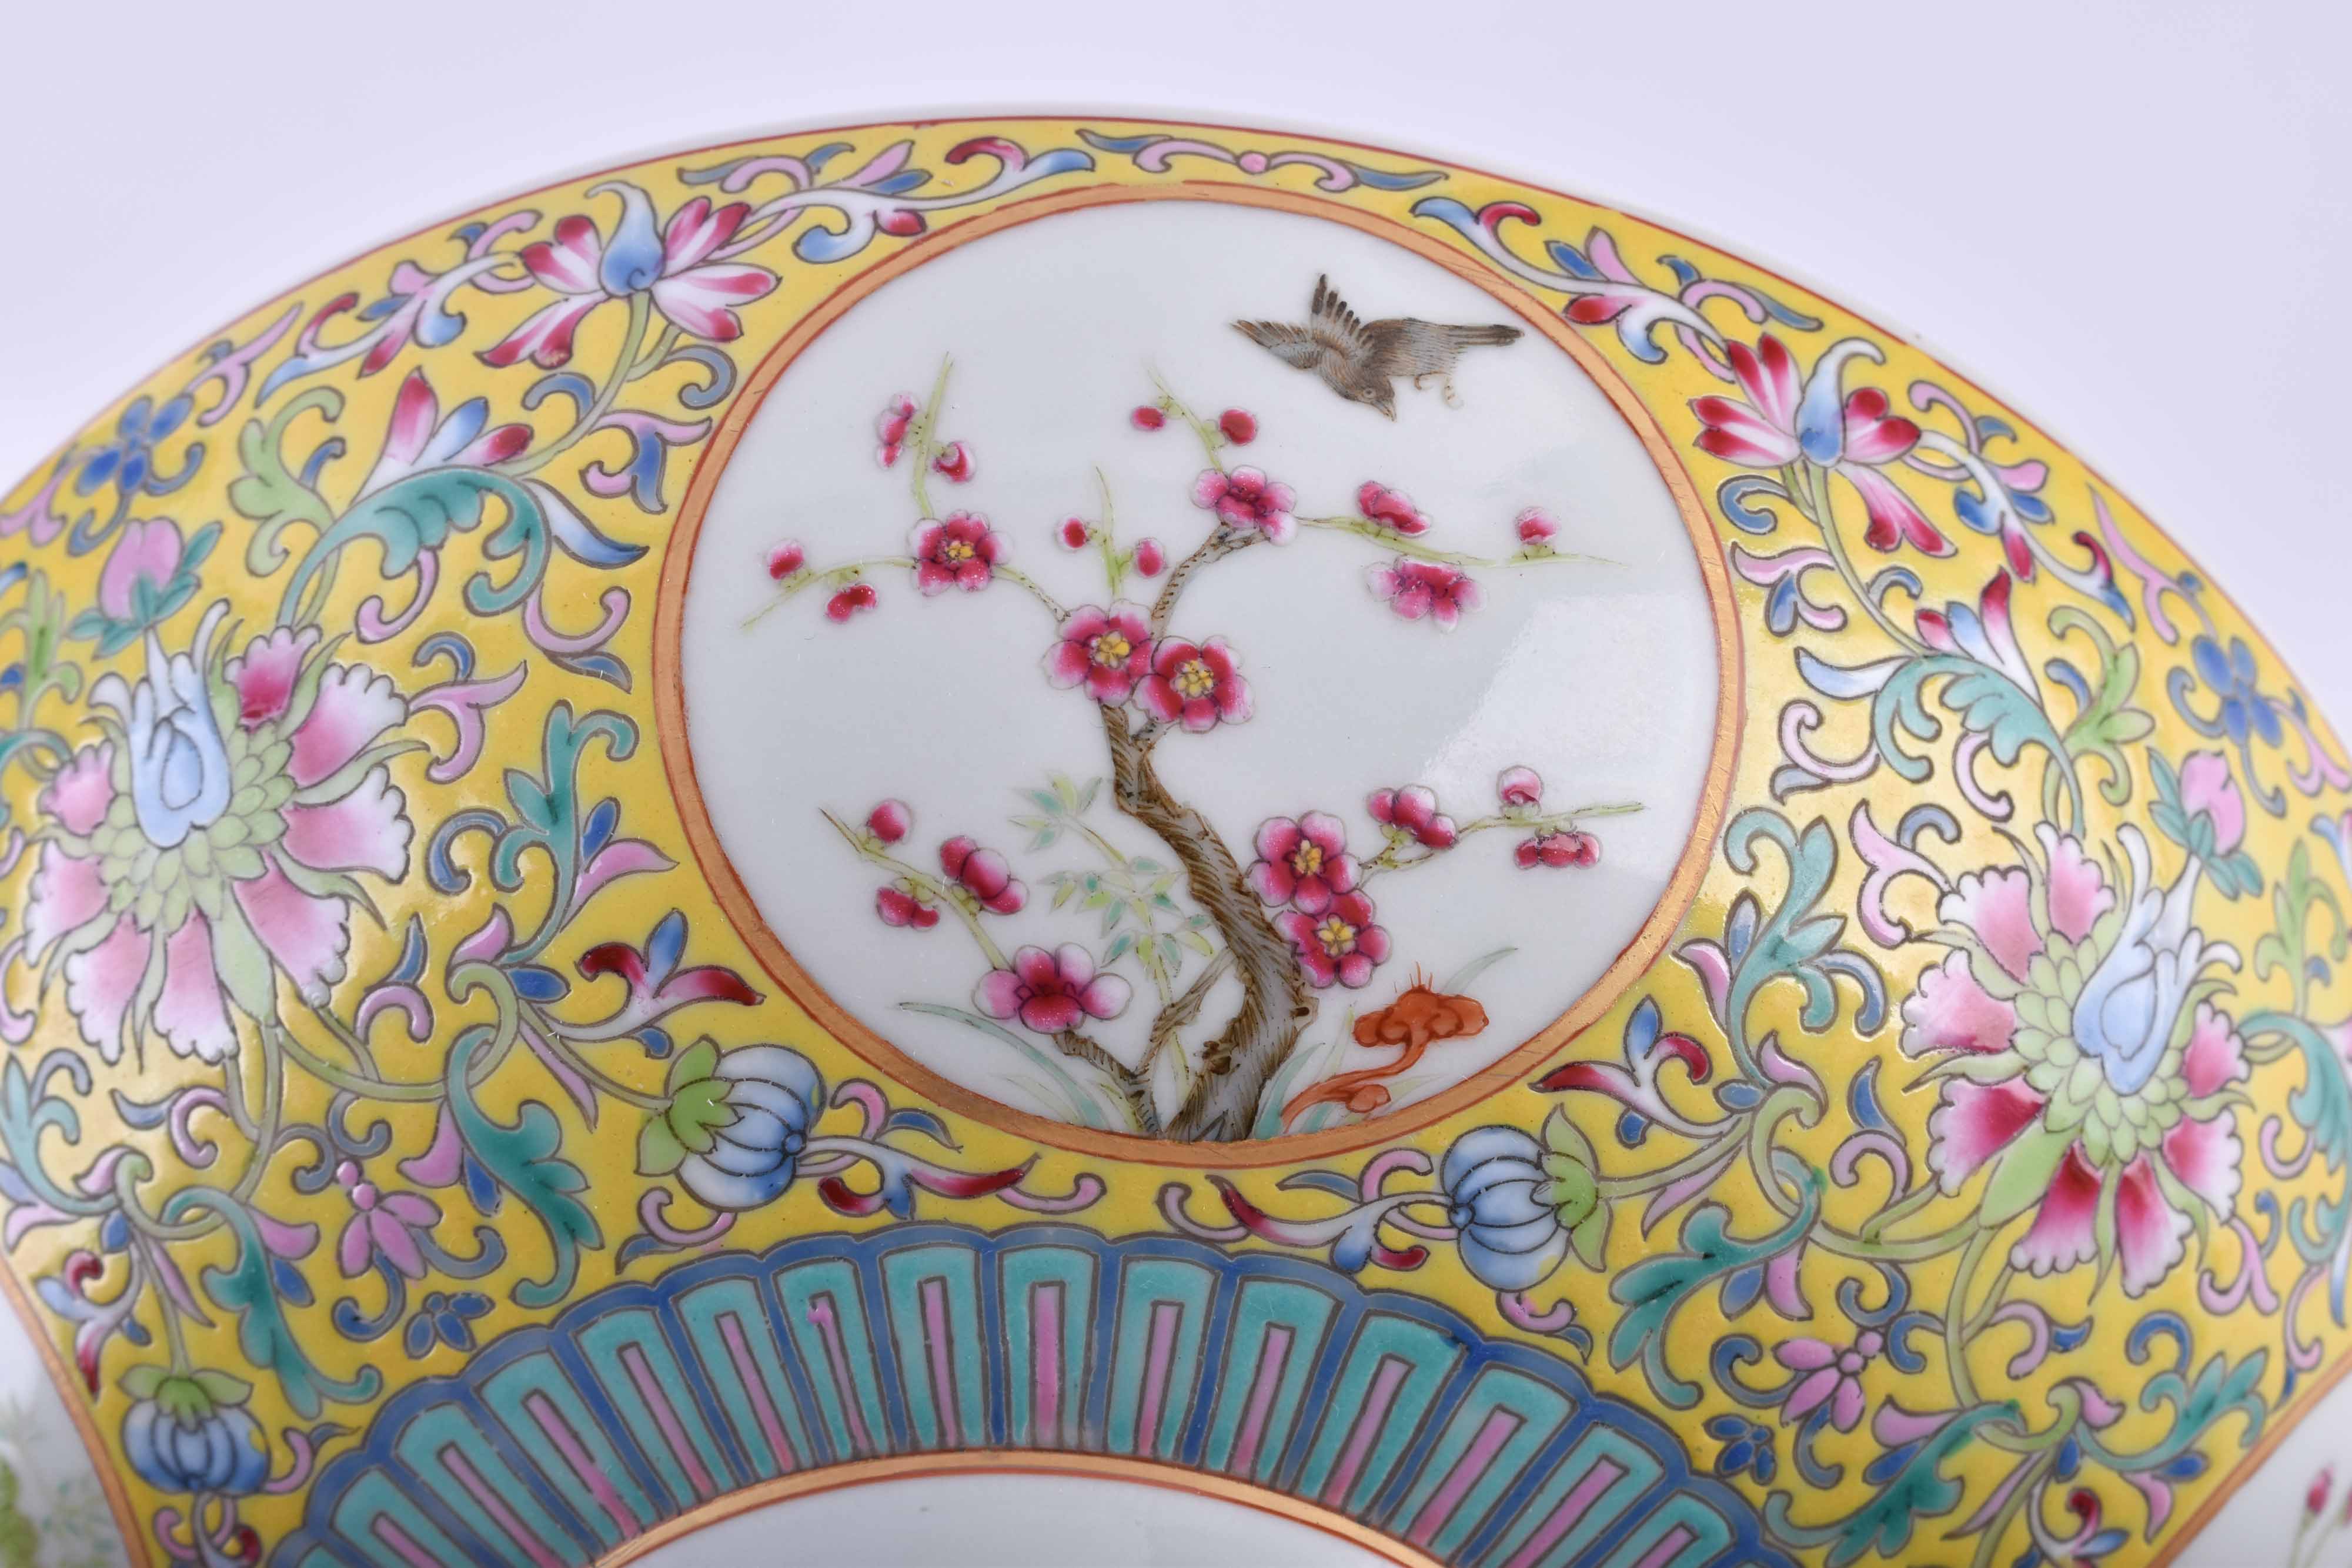  Famille rose bowl late Qing dynasty - Image 10 of 12